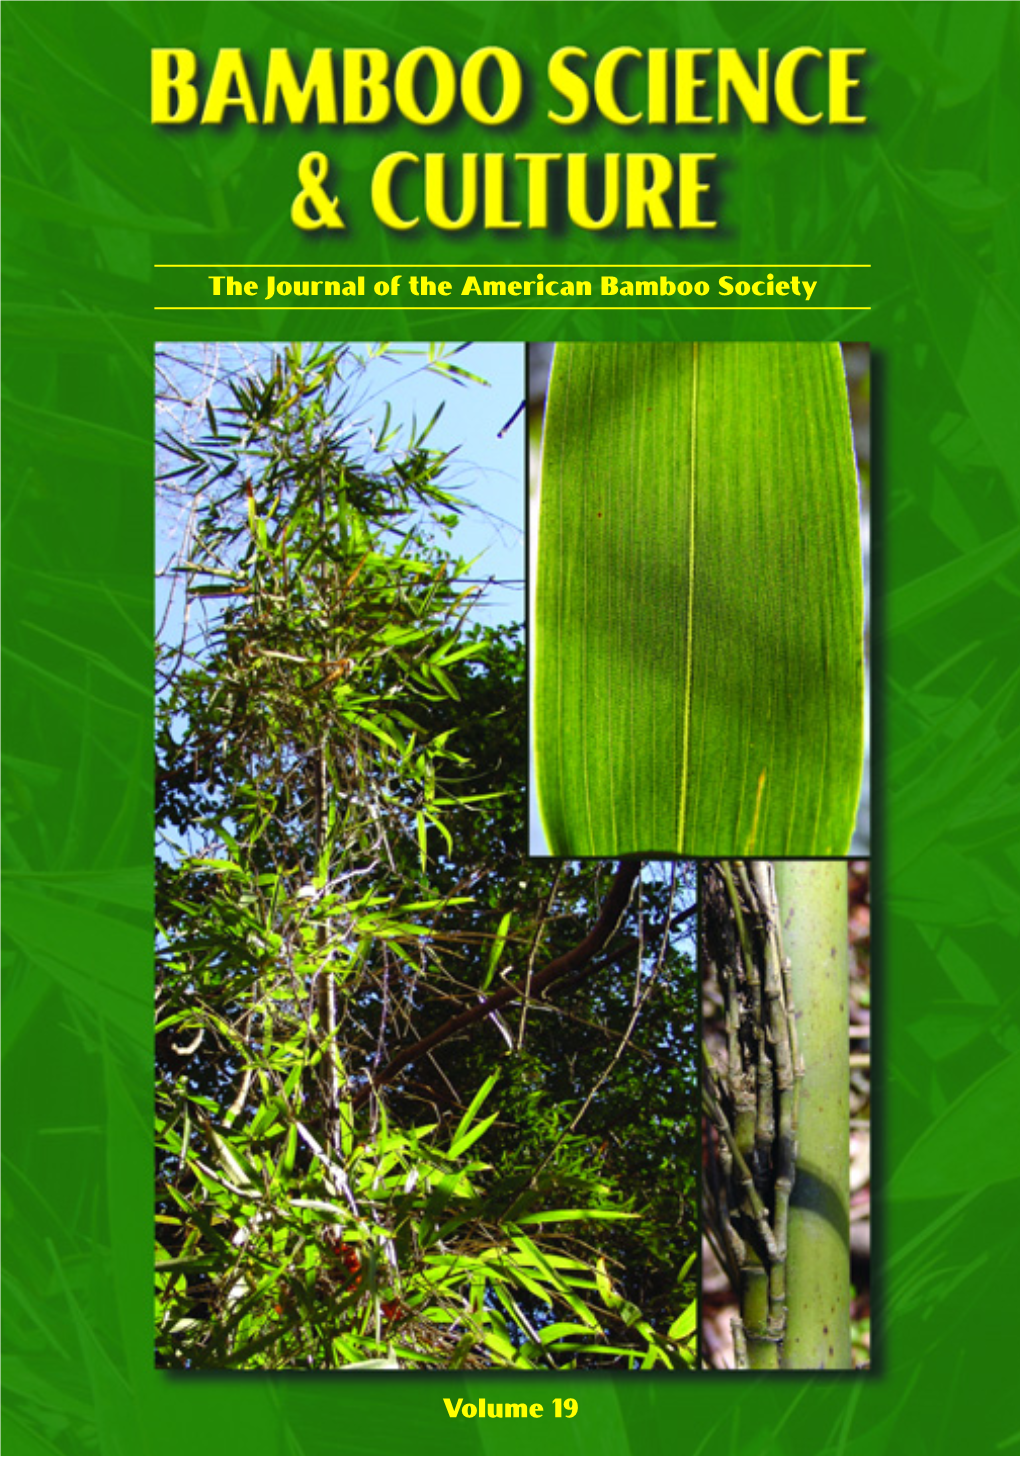 The Journal of the American Bamboo Society Volume 19